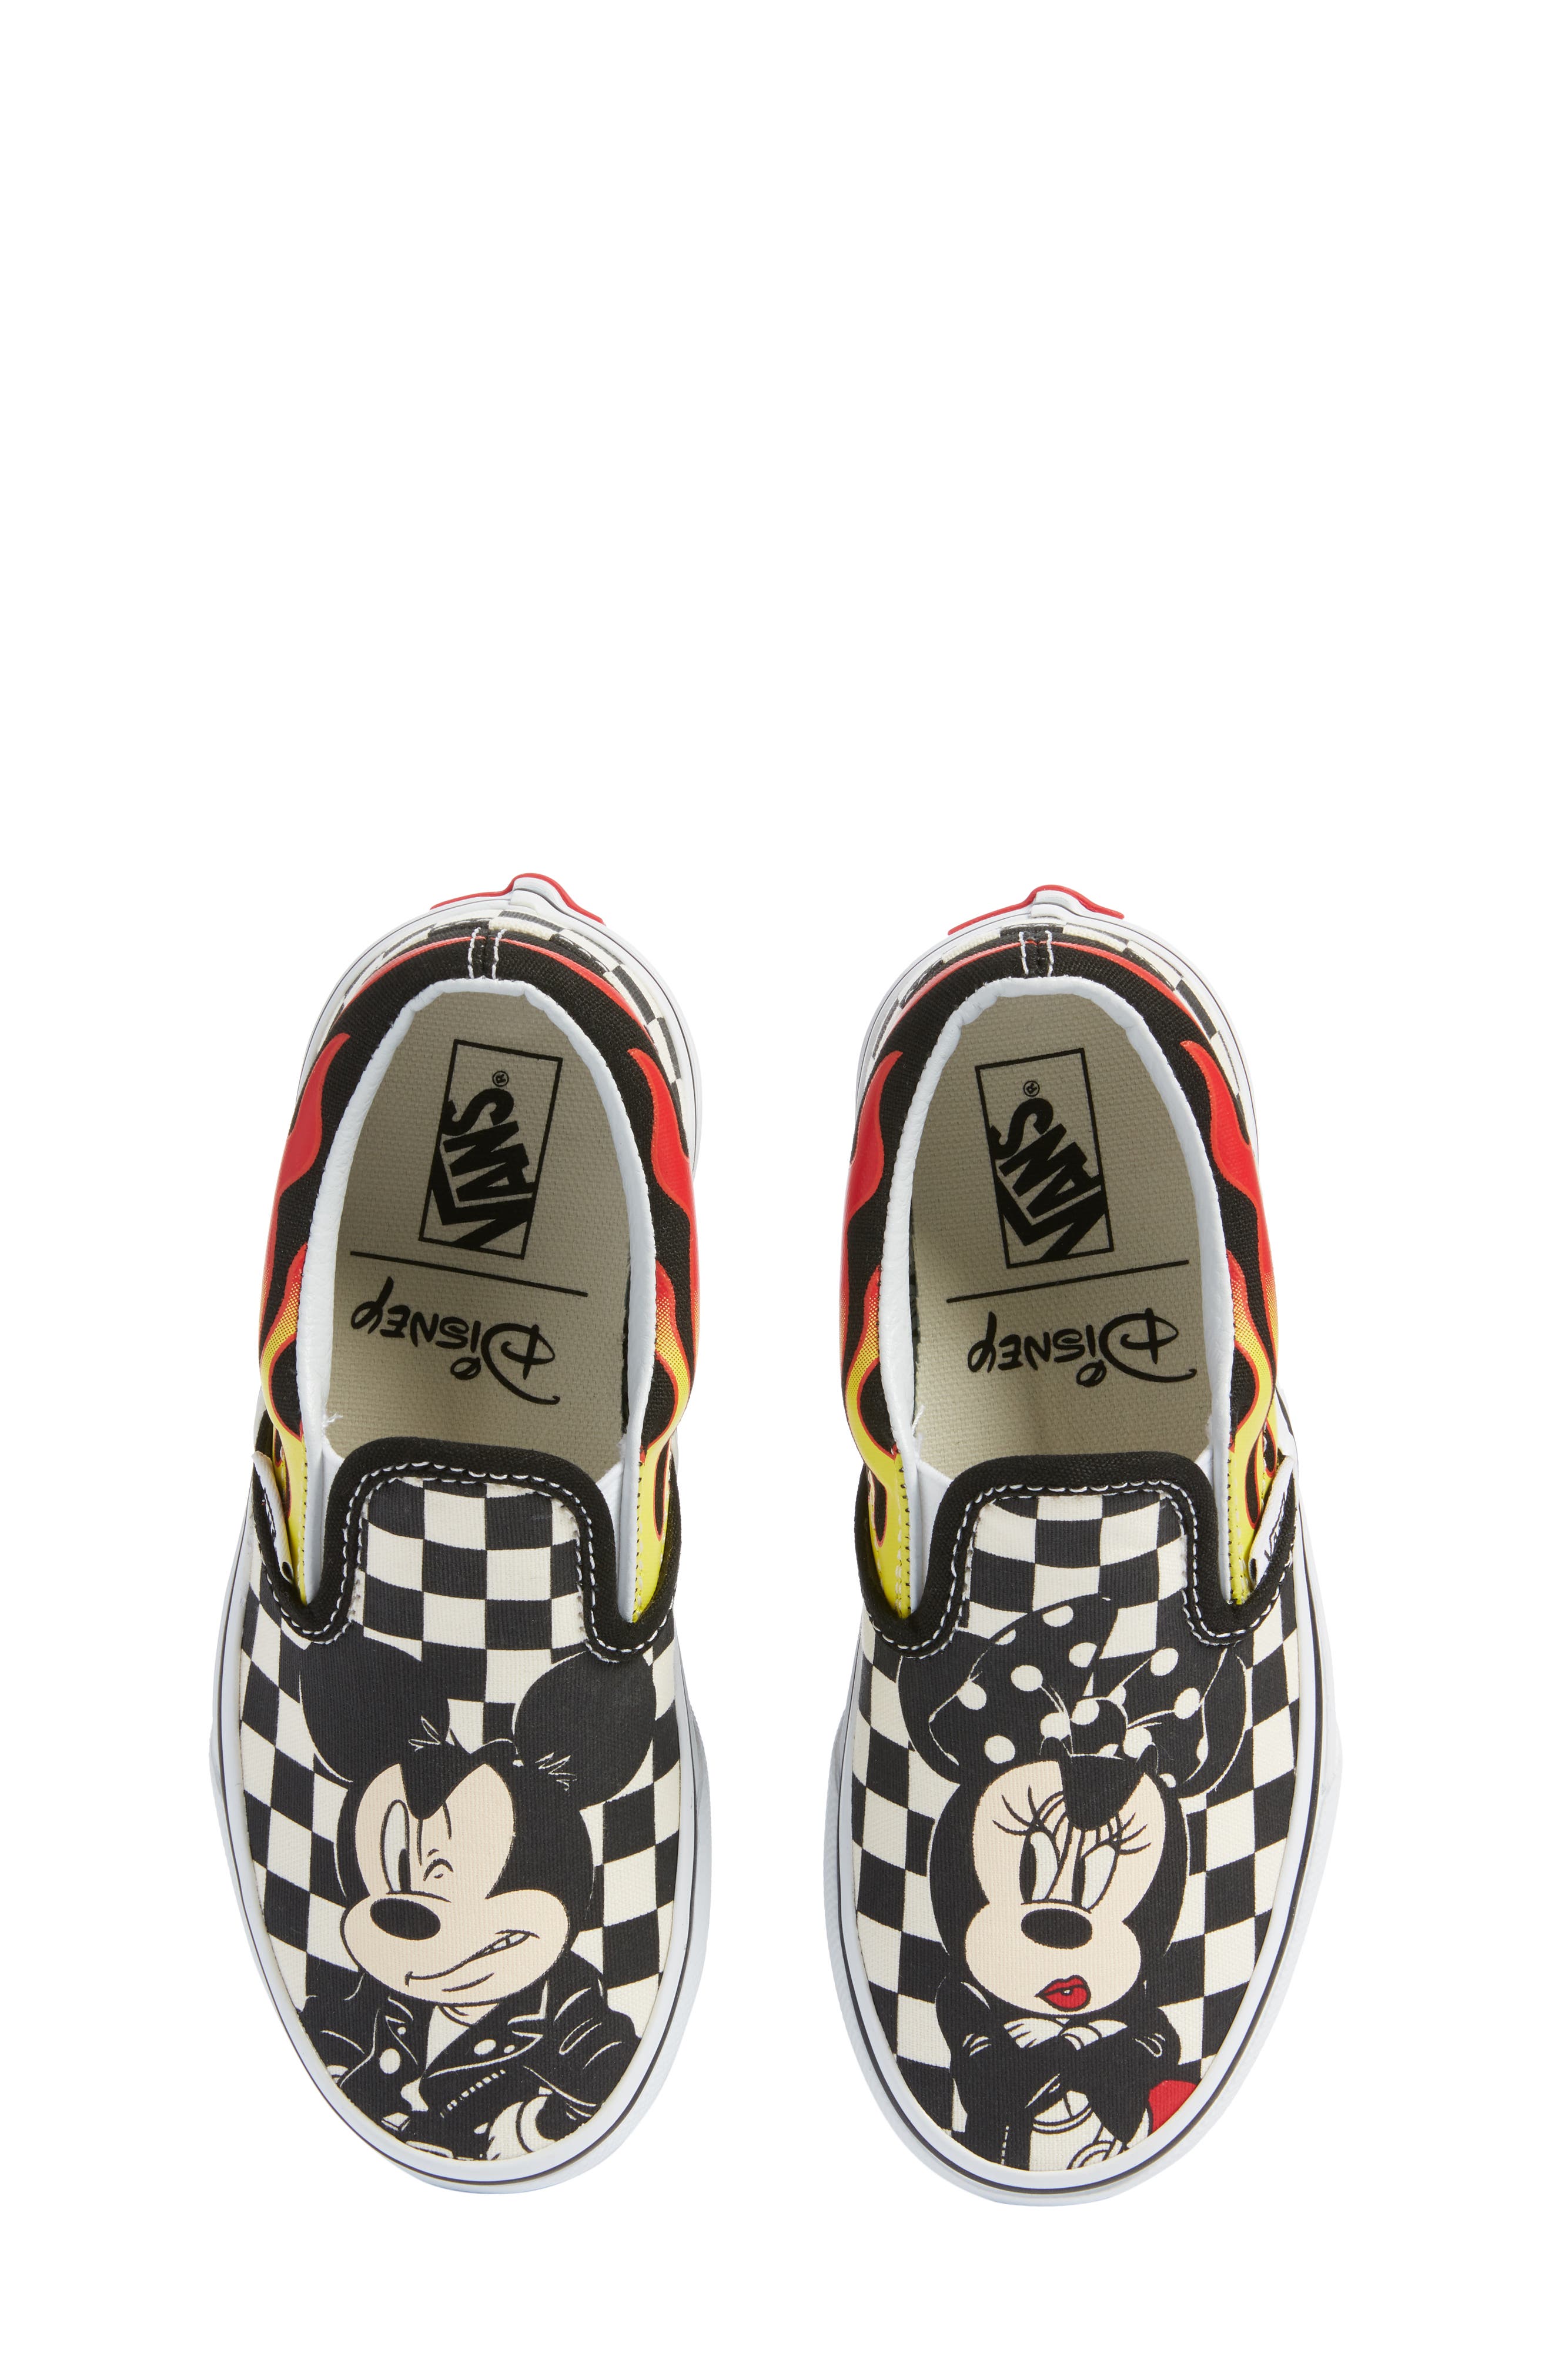 mickey mouse vans baby